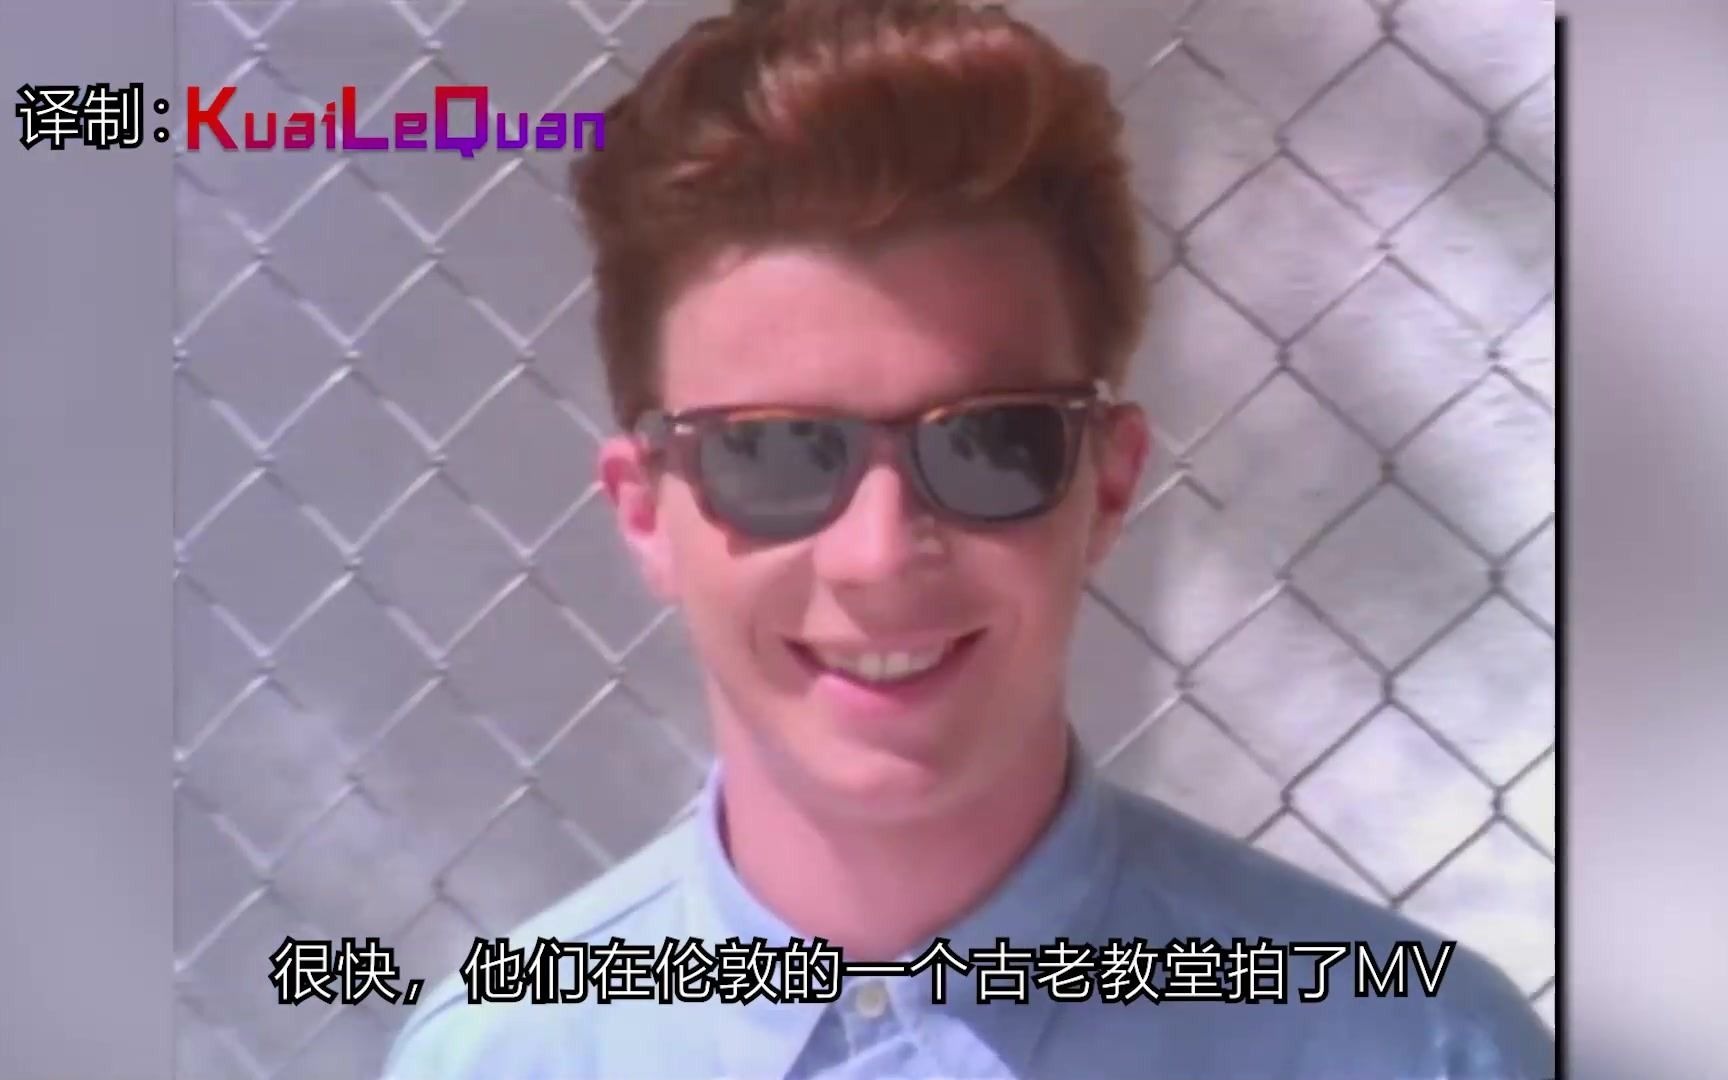 Rickrolling的起源 Never Gonna Give You Up meme解惑